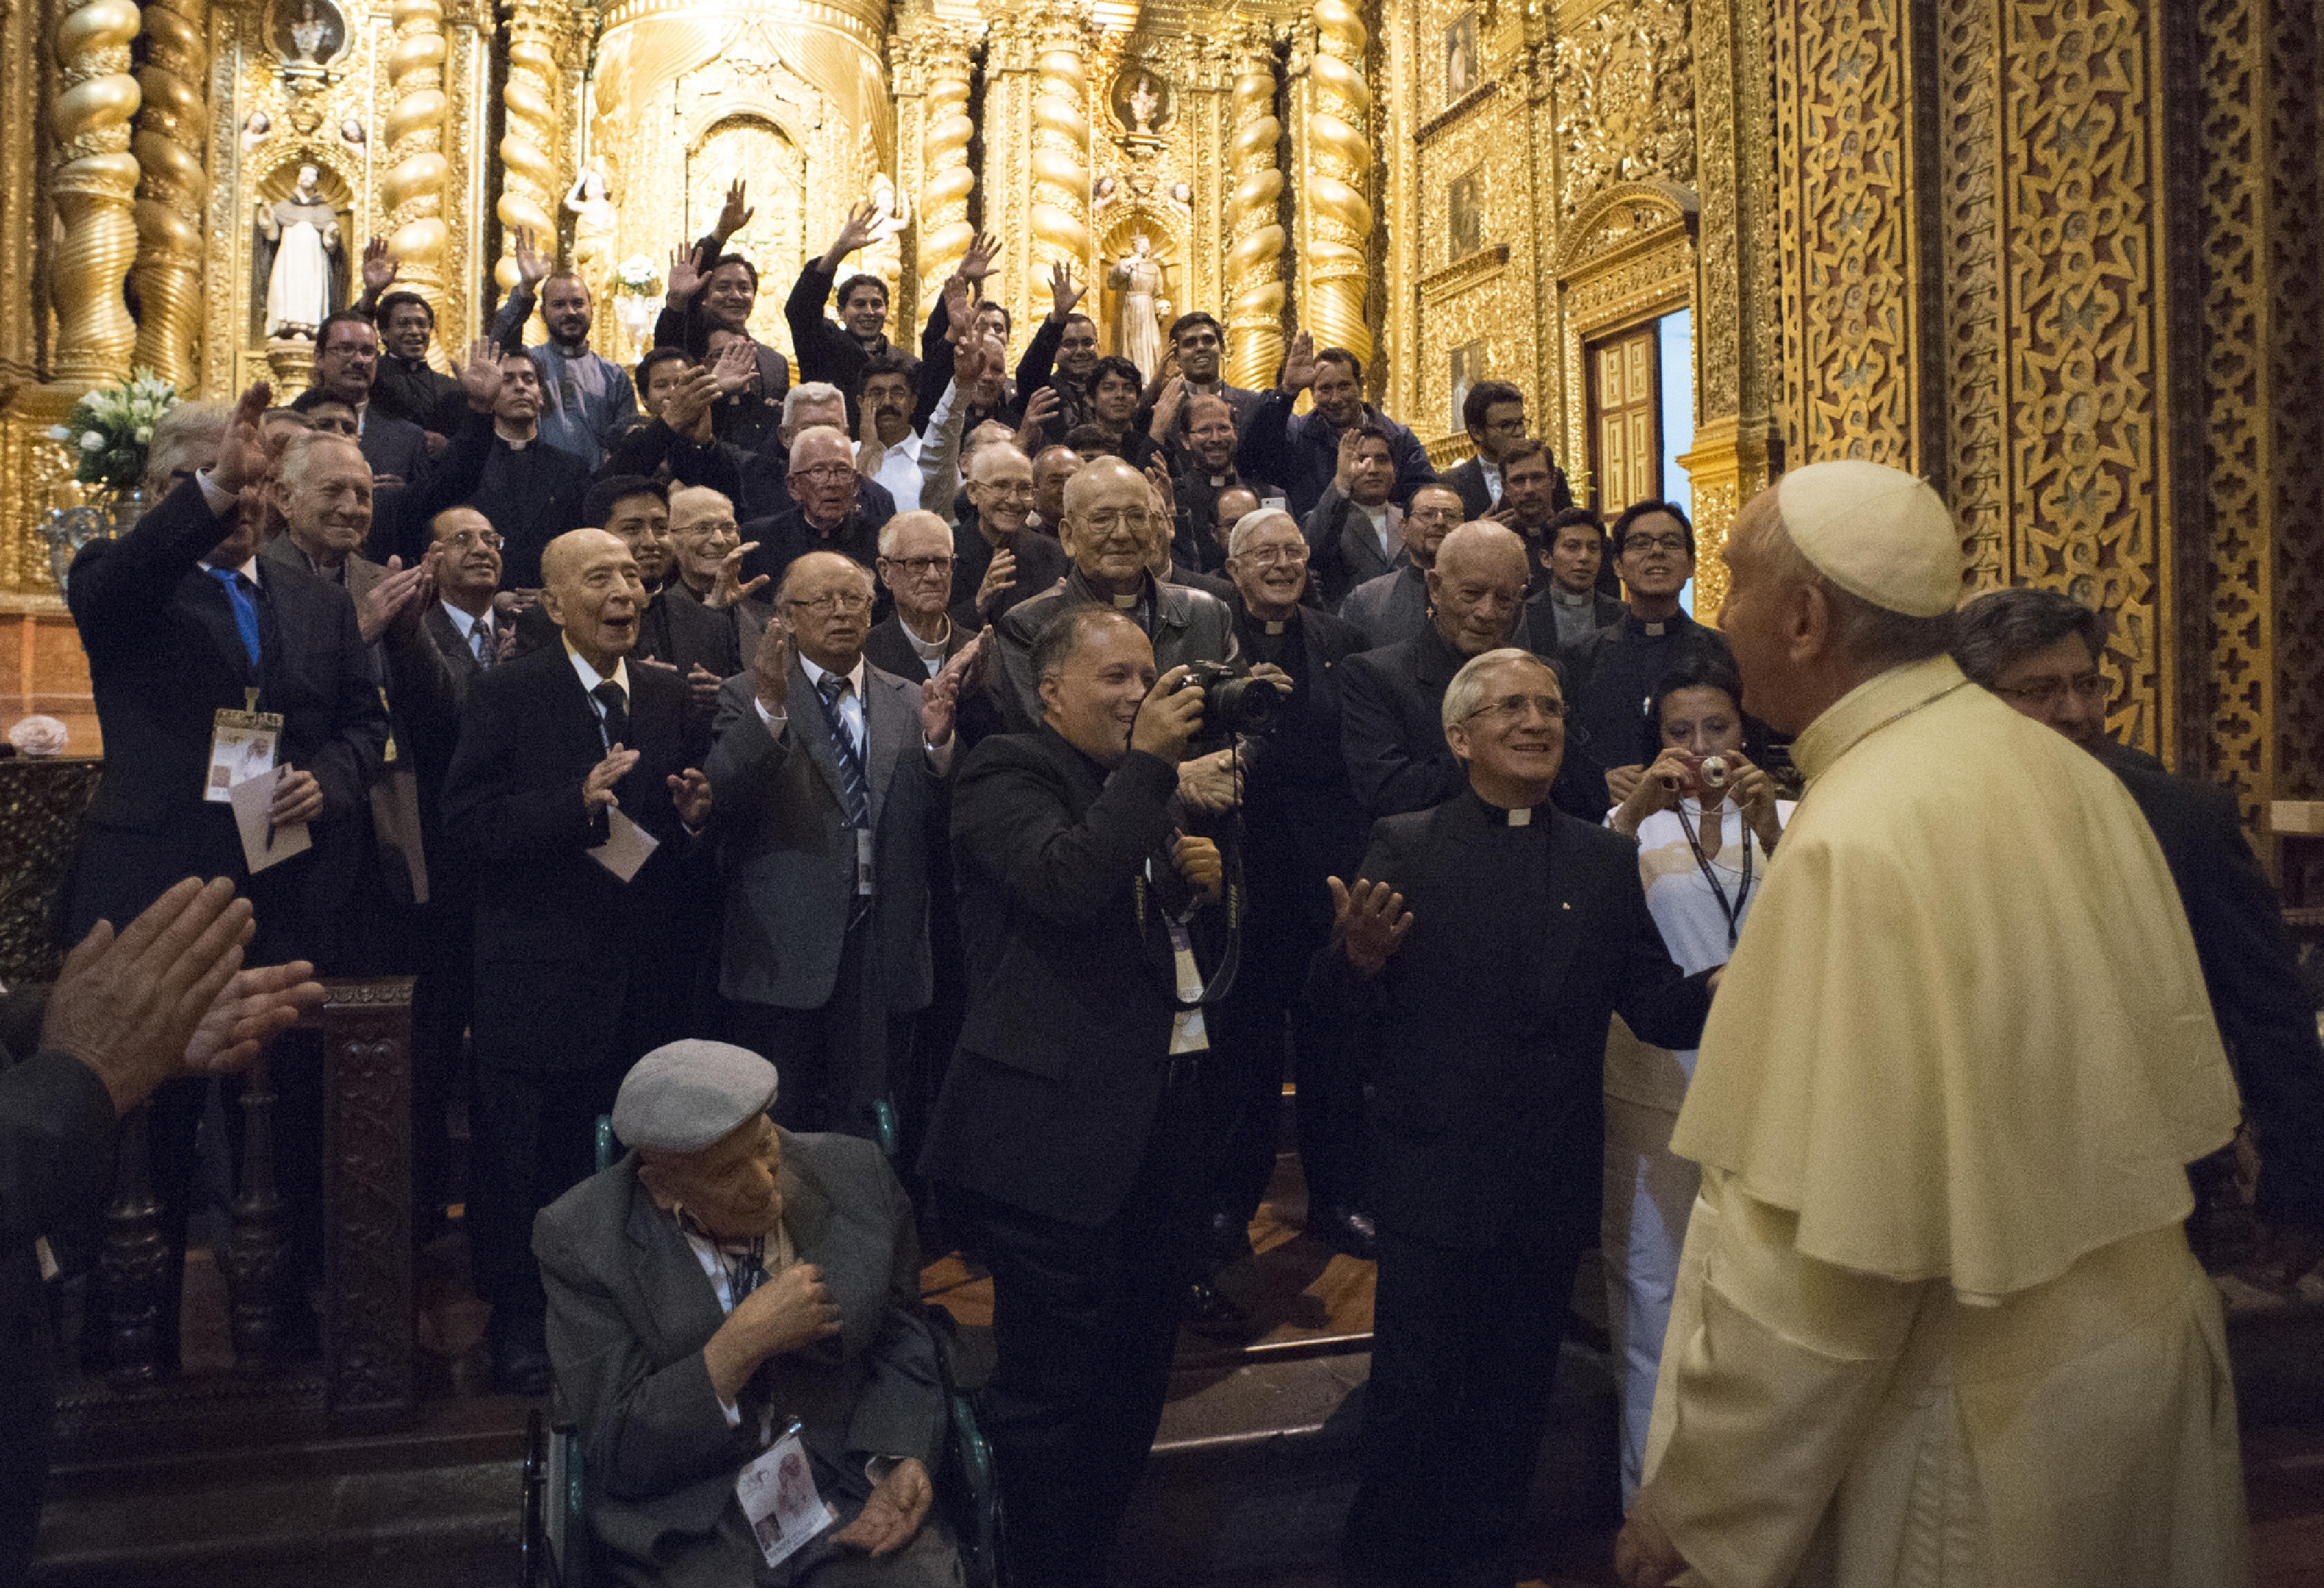 Pope Francis' private visit of to the Church of the Society of Jesus in Quito